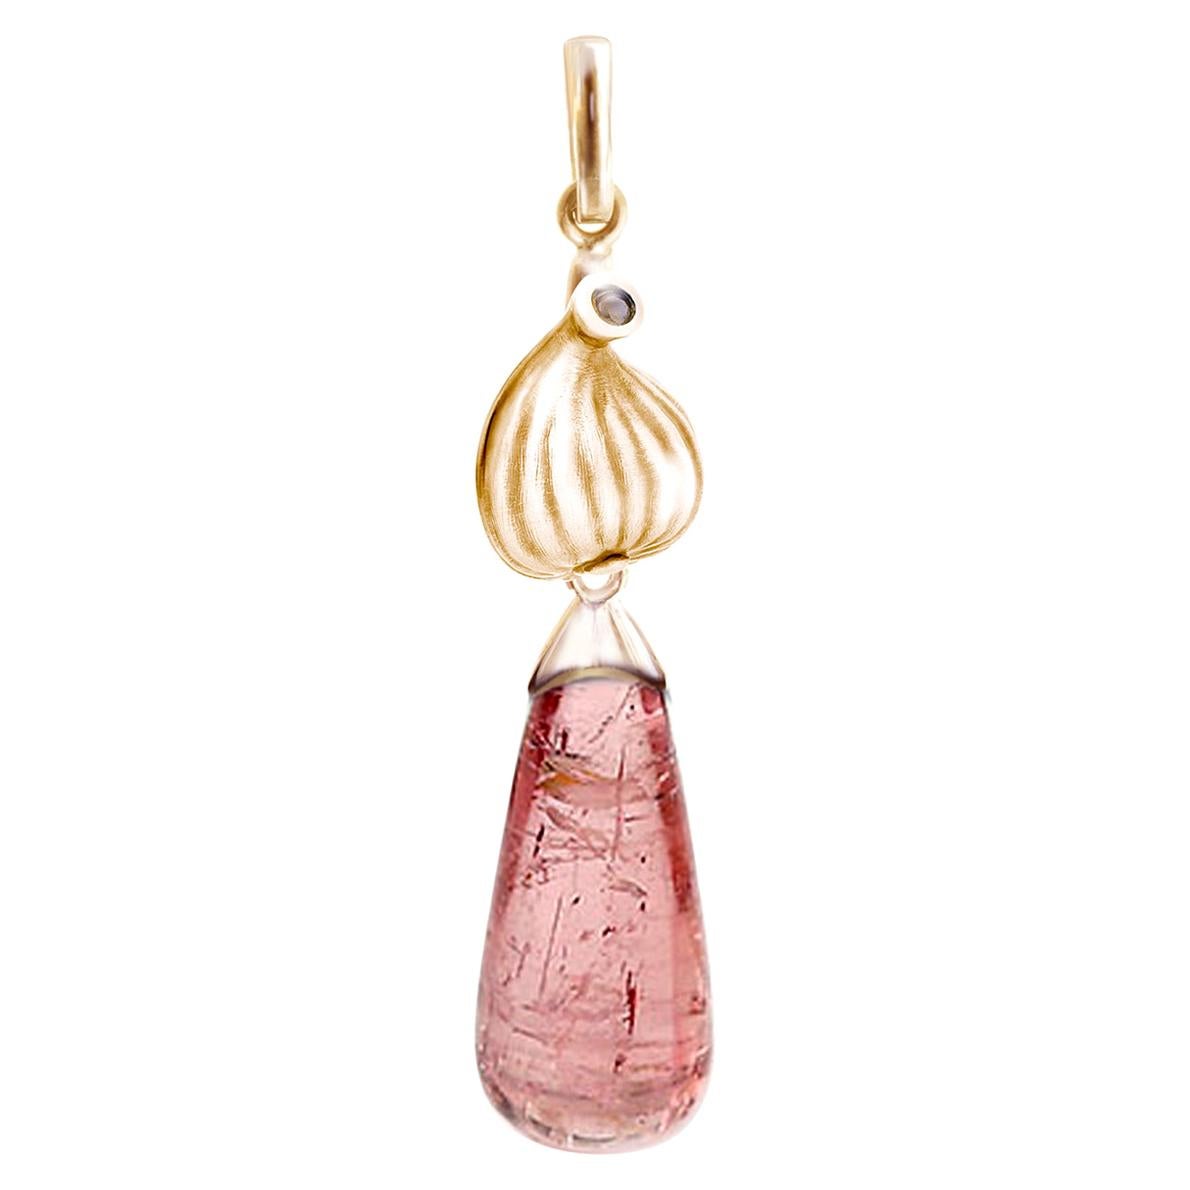 This contemporary drop Pendant Necklace by the artist is made of 18 karat rose gold with a 20x8 mm (8.23 carats) natural pink tourmaline and round diamonds. The Fig collection was featured in a review by Vogue UA and was designed by the artist and